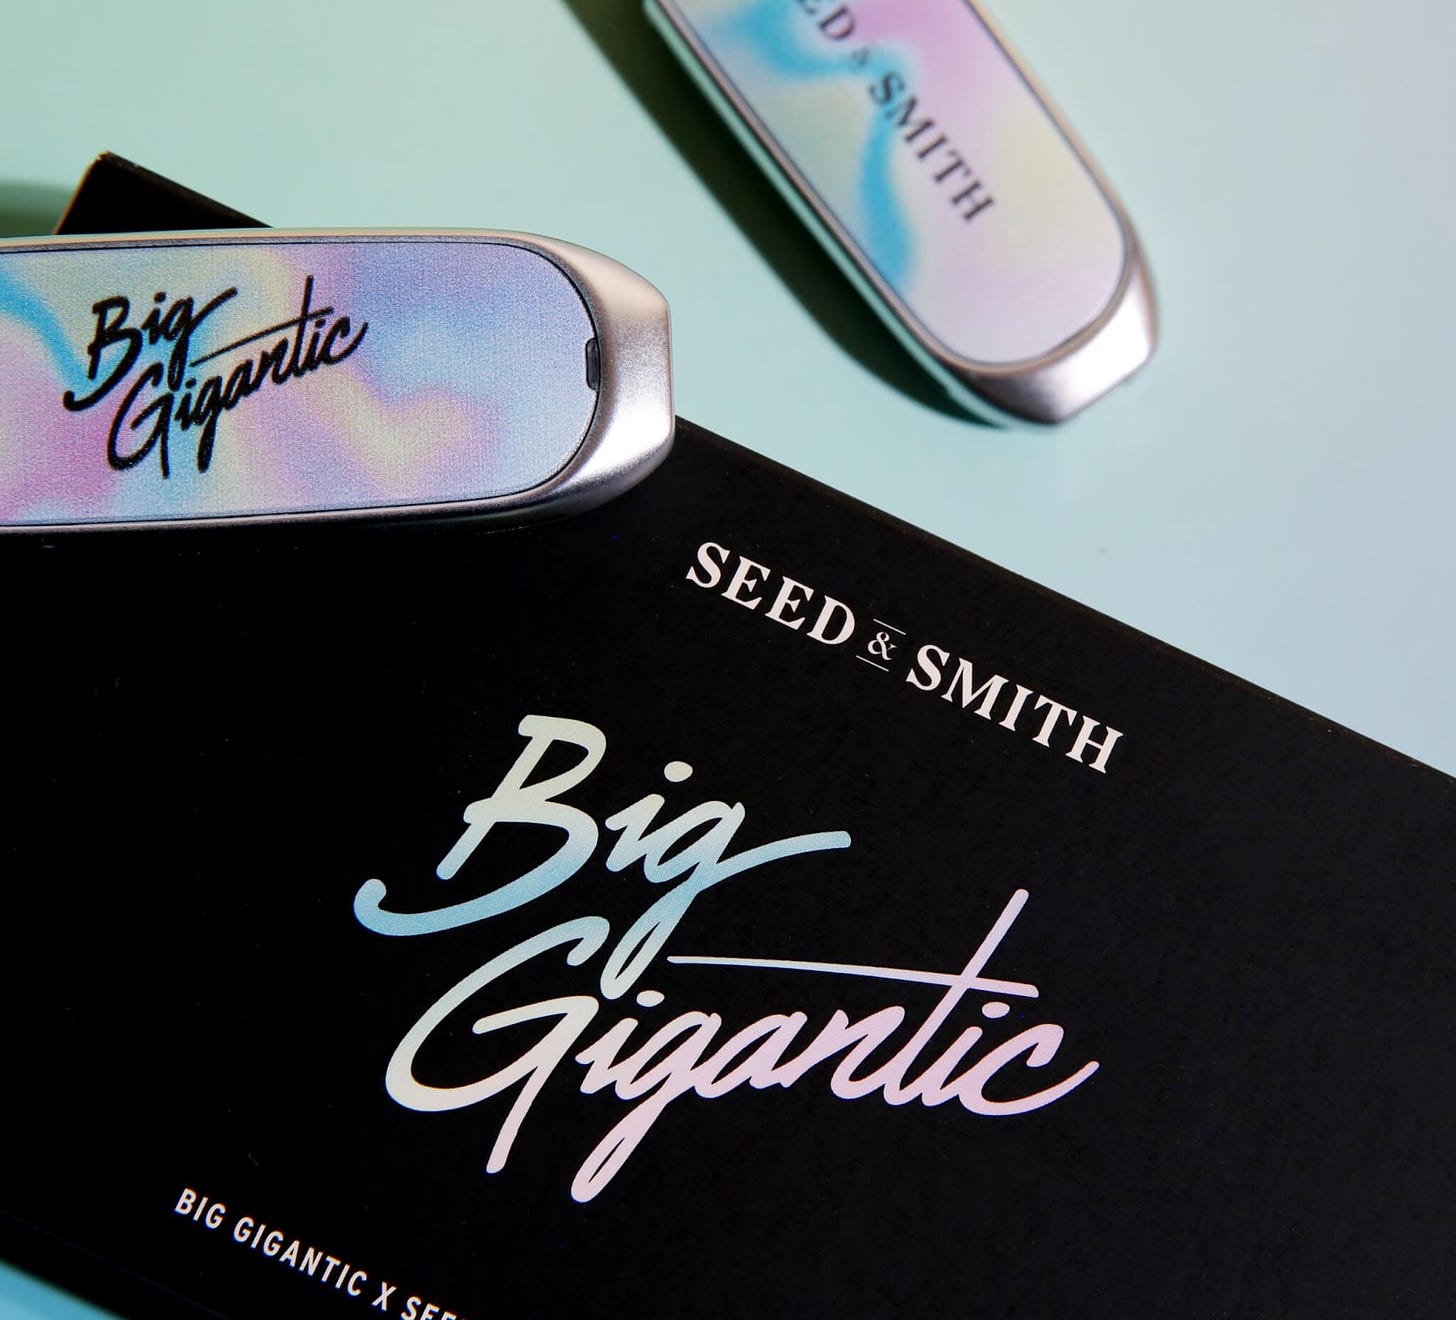 Big Gigantic Dart - The Seed and Smith and Big Gigantic Collab